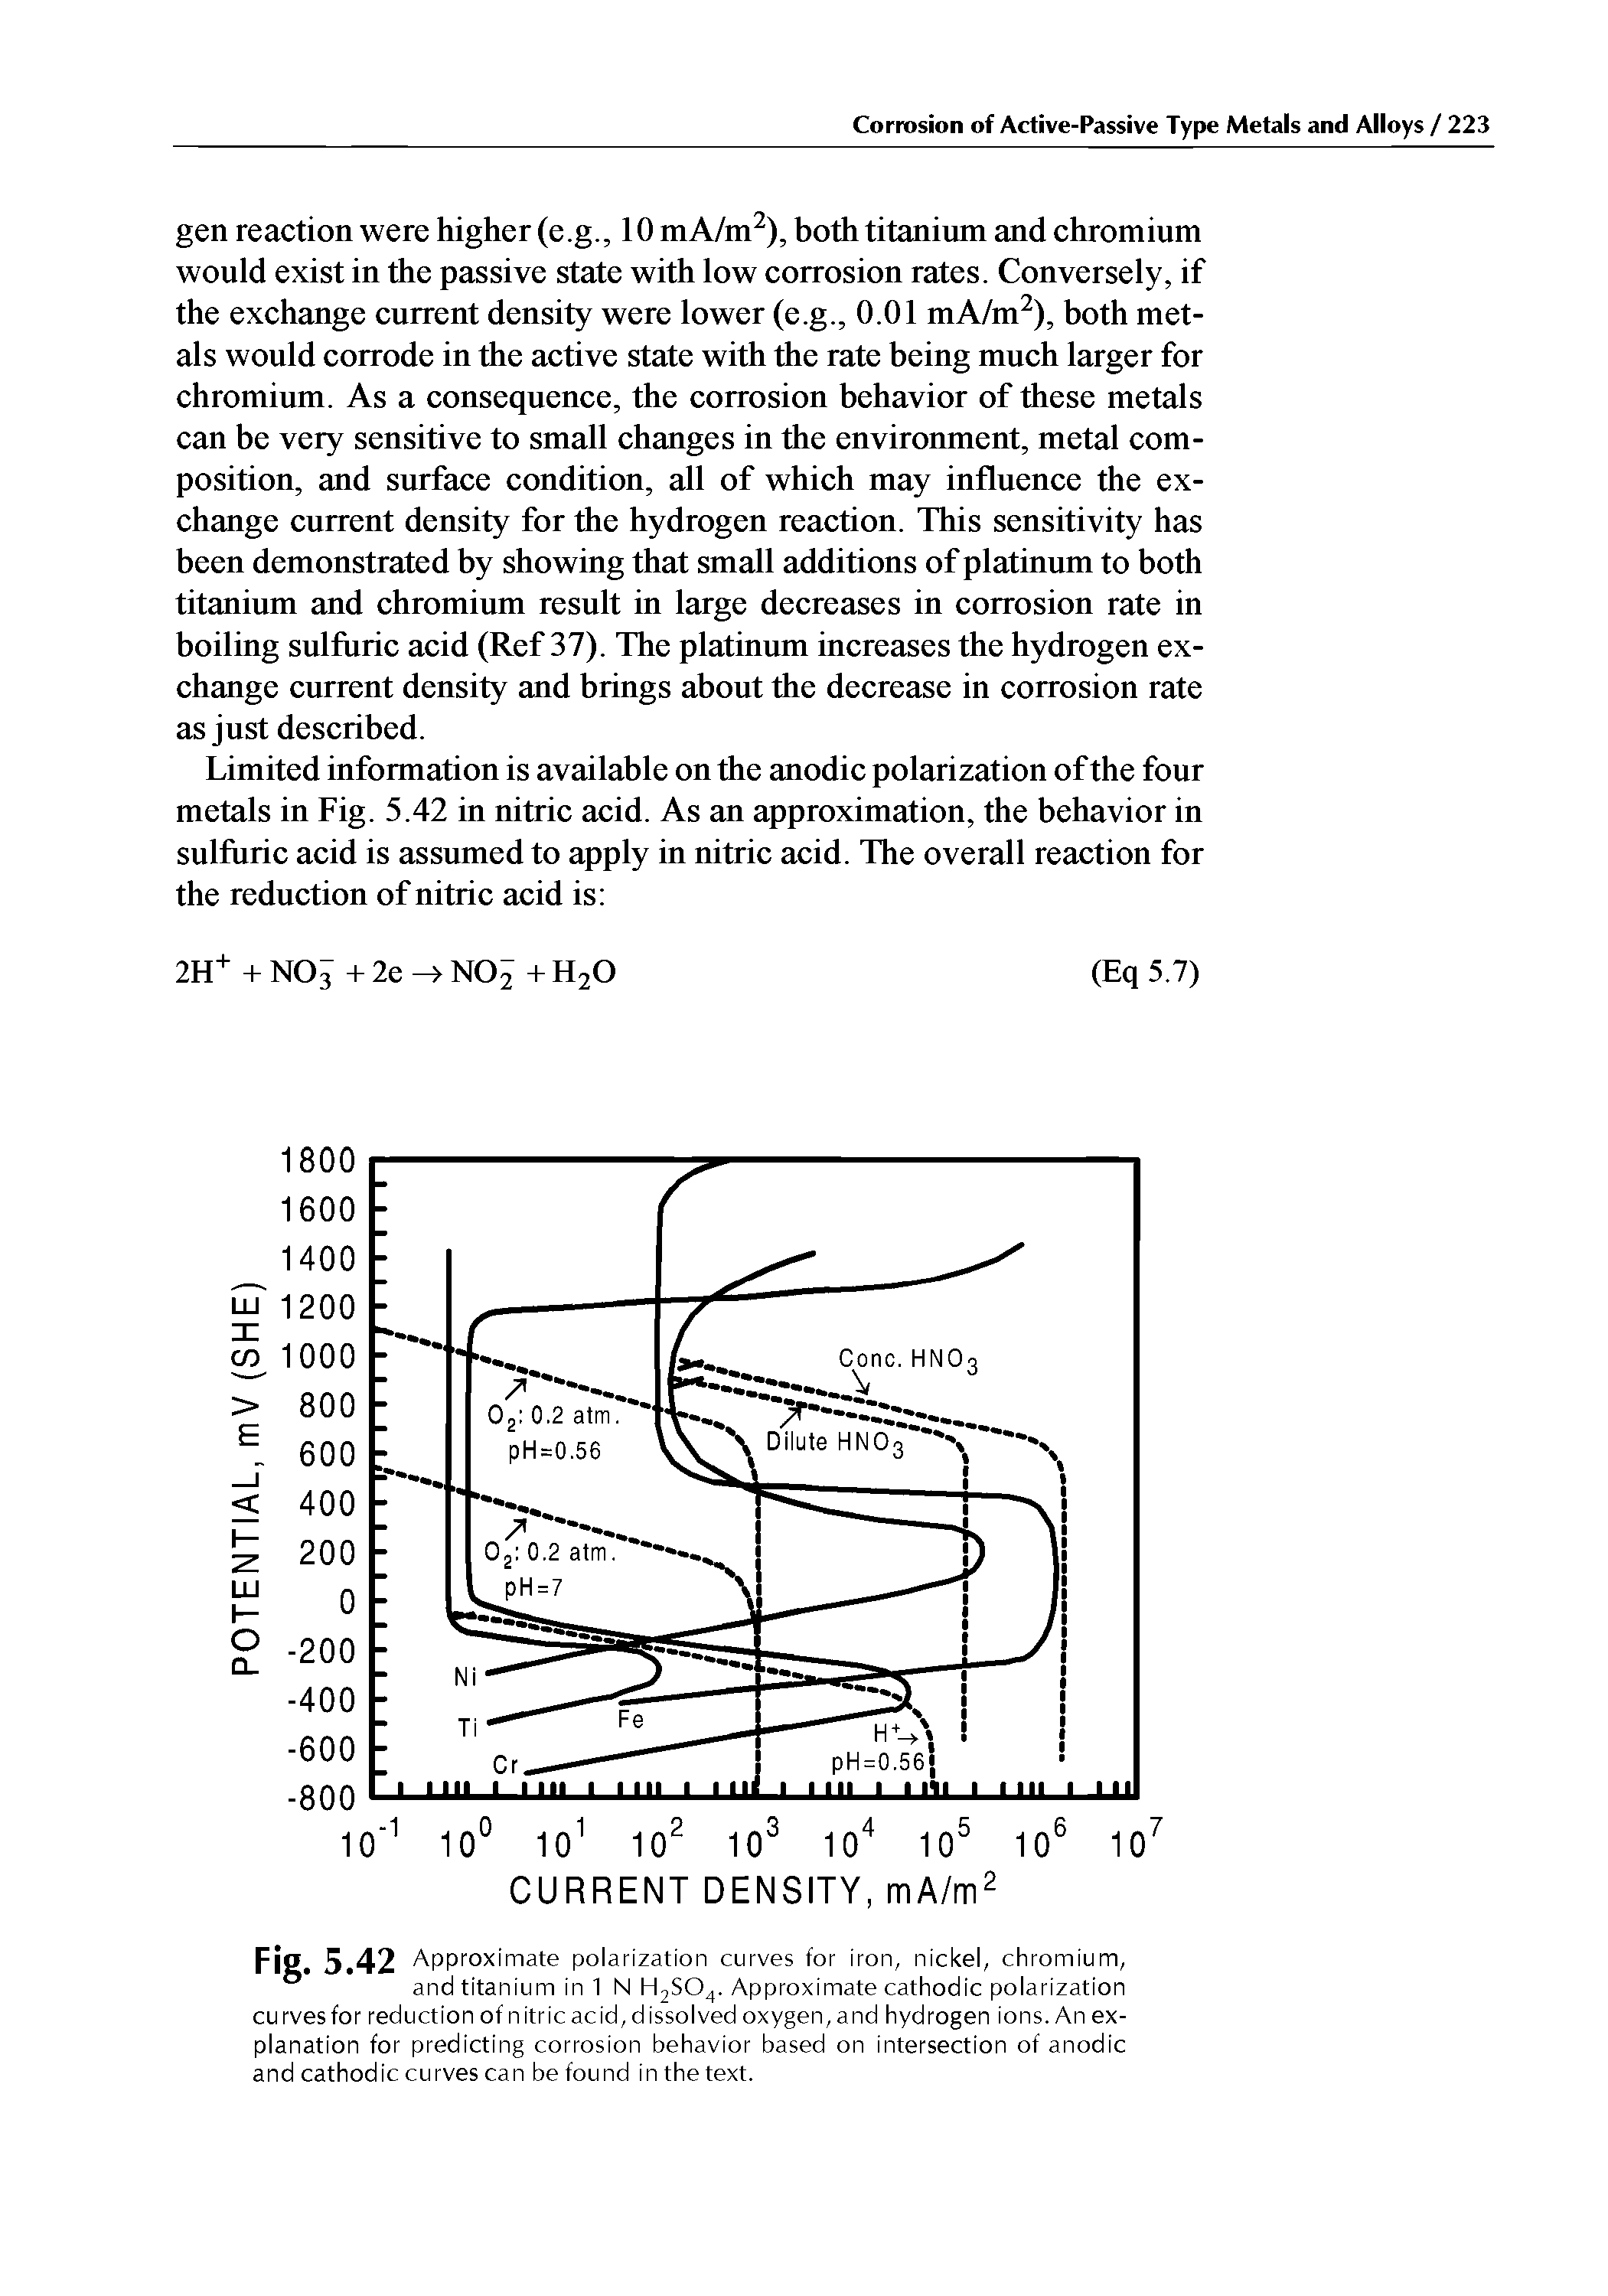 Fig. 5.42 Approximate polarization curves for iron, nickel, chromium, and titanium in 1 N H2S04. Approximate cathodic polarization curves for reduction of nitric acid, dissolved oxygen, and hydrogen ions. An explanation for predicting corrosion behavior based on intersection of anodic and cathodic curves can be found in the text.